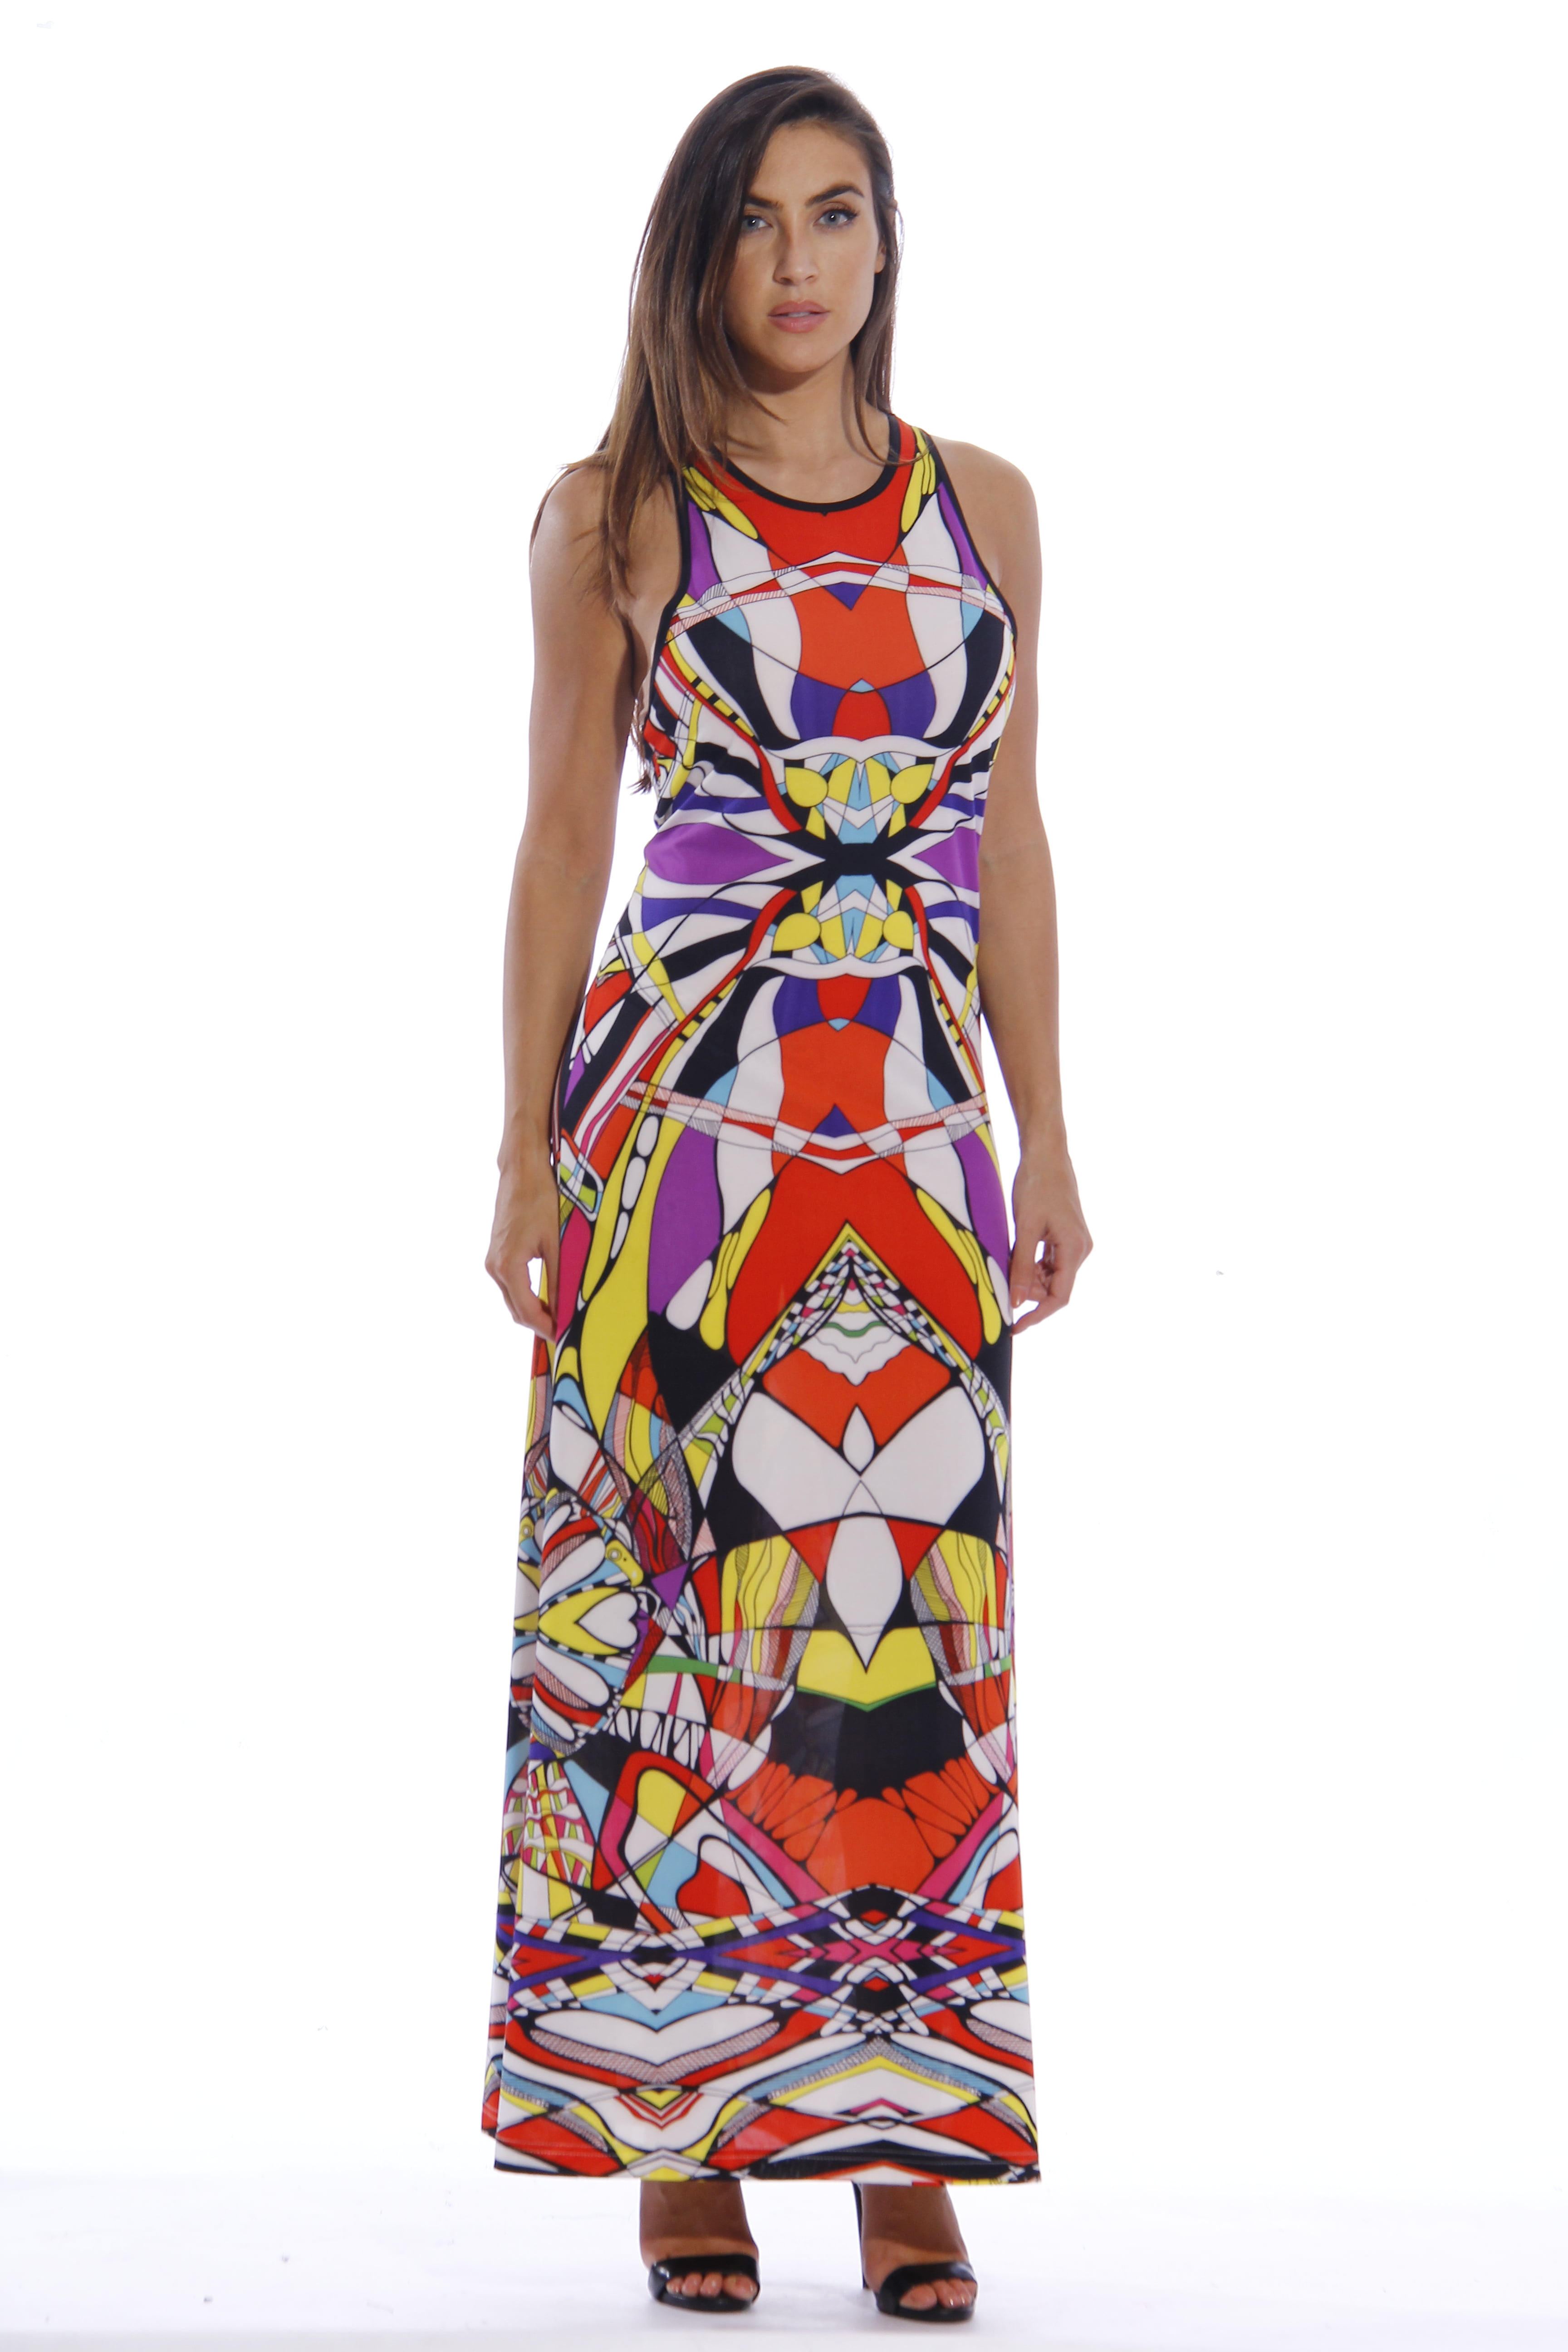 Just Love Maxi Dresses for Women / Summer Dresses (Mirror Image ...